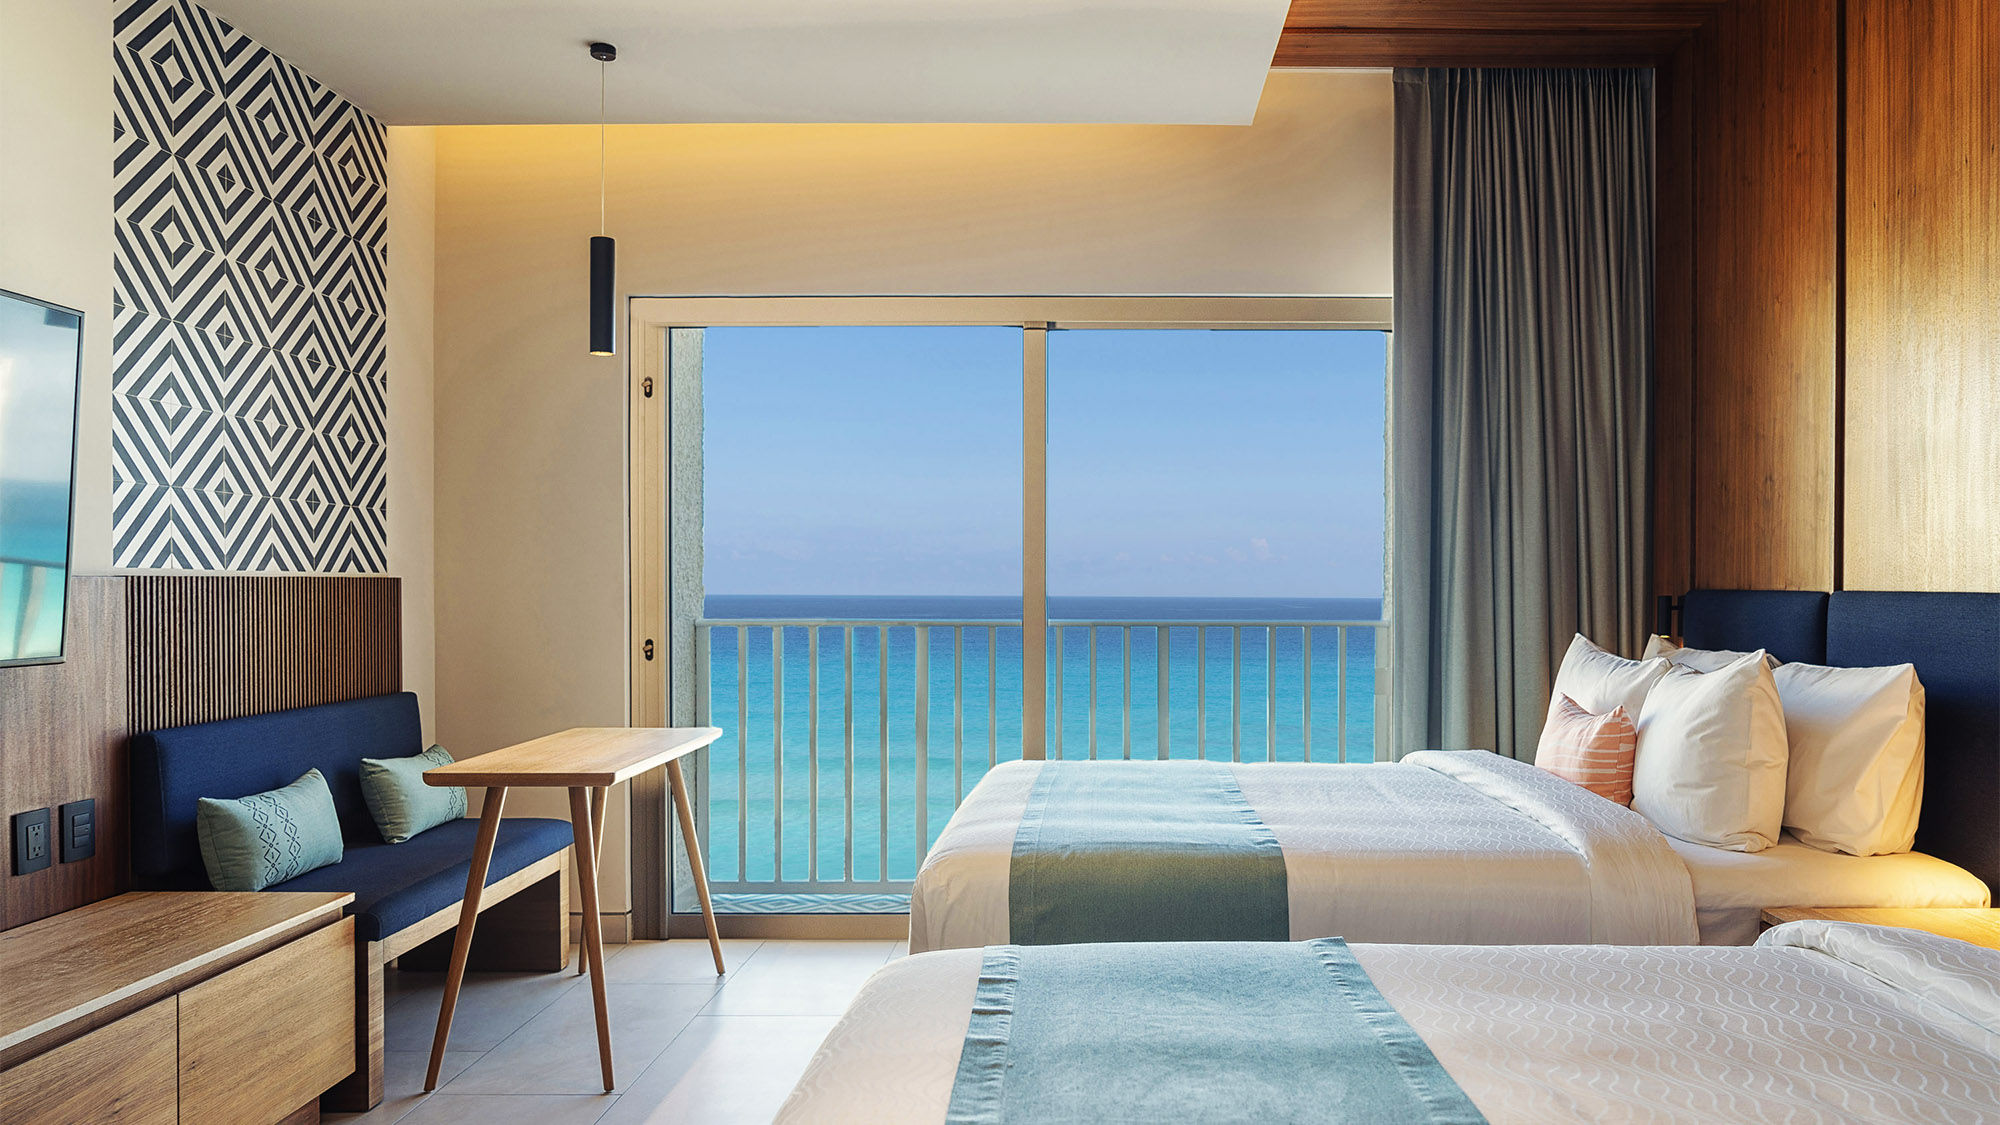 A double bed balcony beachfront guestroom at the Hilton Cancun Mar Caribe.